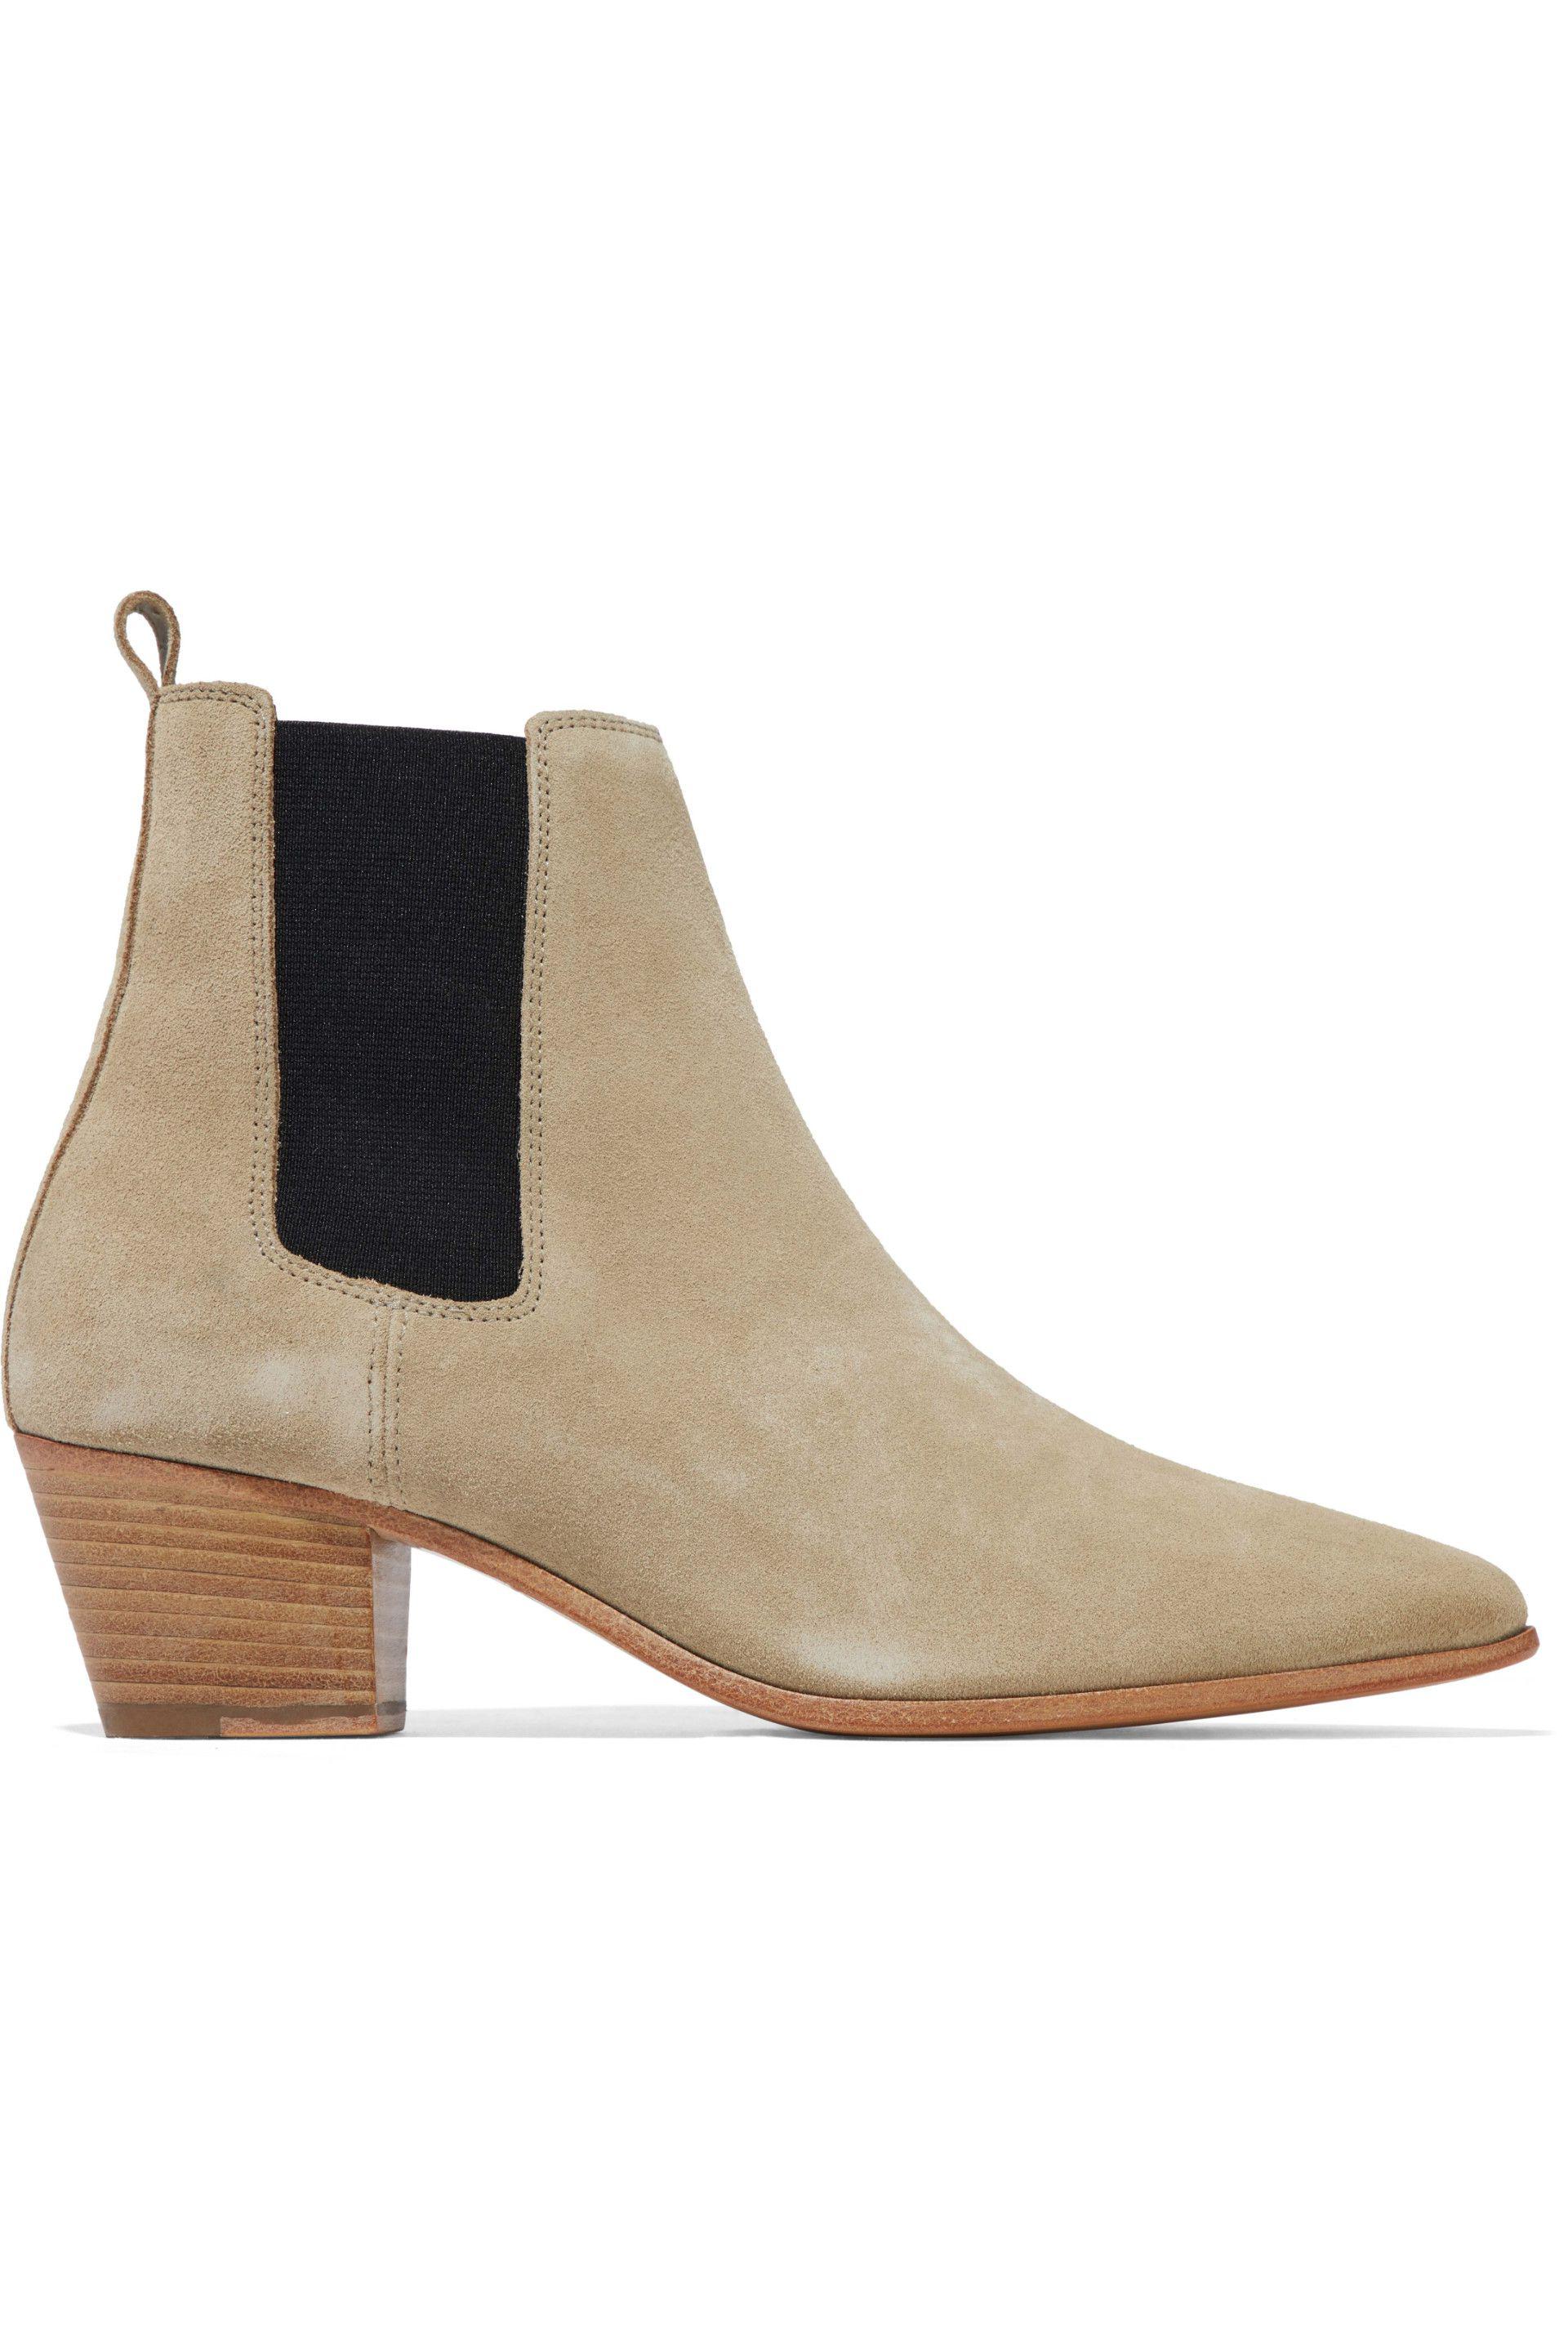 iro suede ankle boots